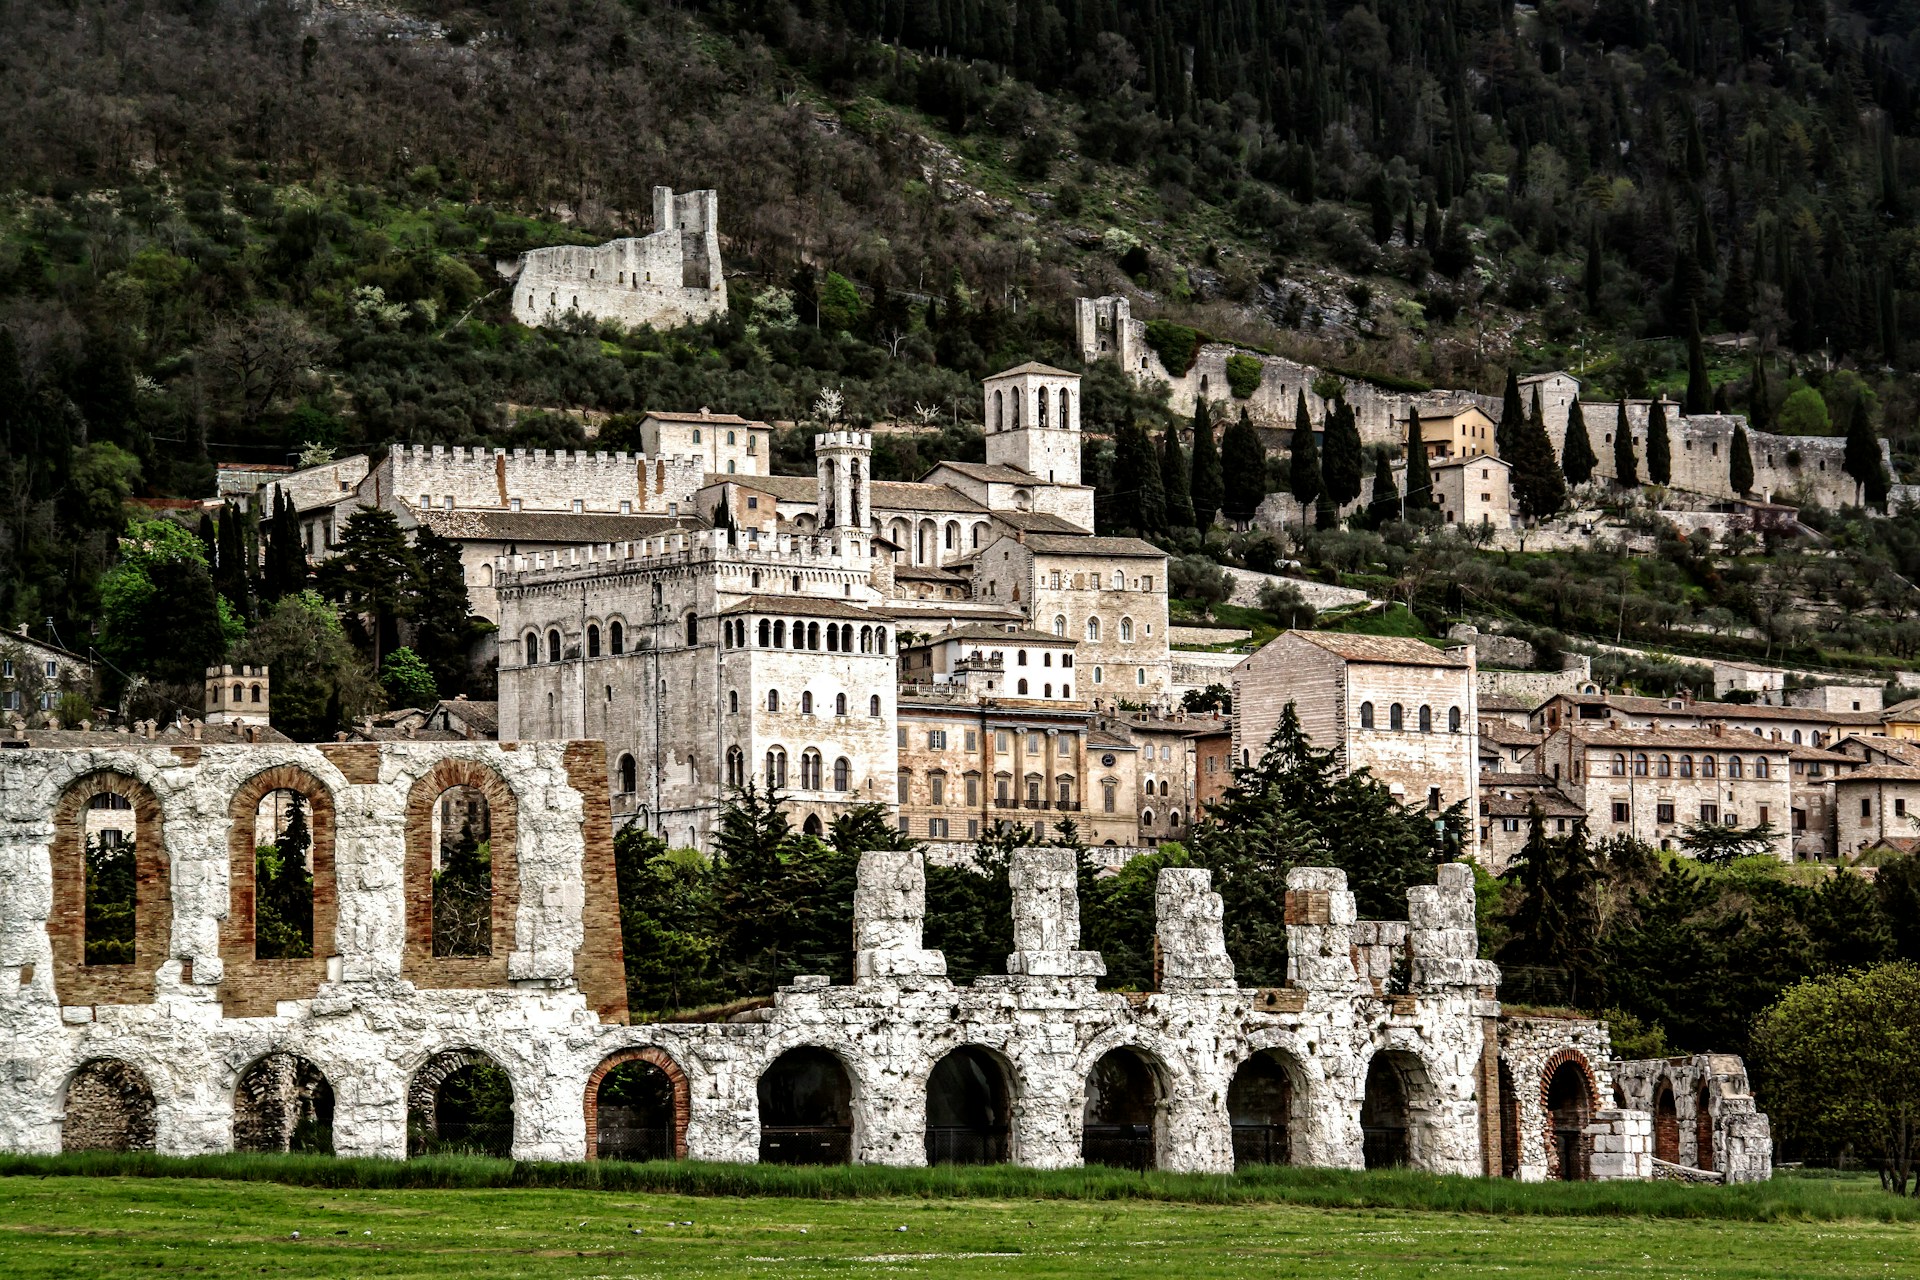 Photo of the town of Gubbio, Umbria, with the roman theatre in the foreground and the rest of the town stretching up the hill in the background